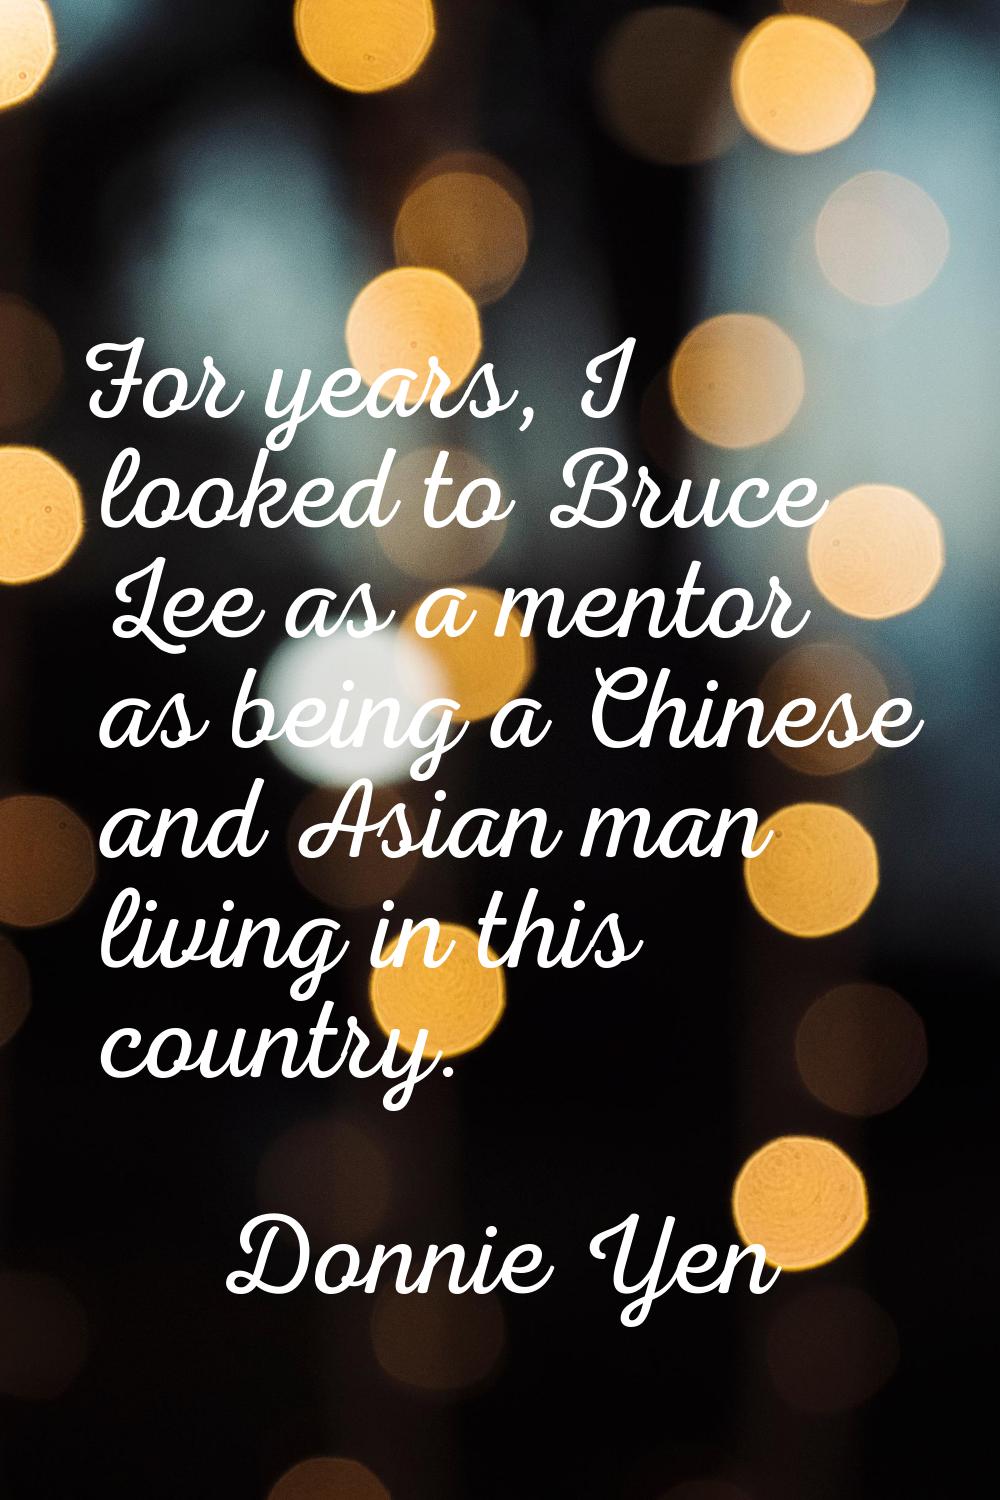 For years, I looked to Bruce Lee as a mentor as being a Chinese and Asian man living in this countr